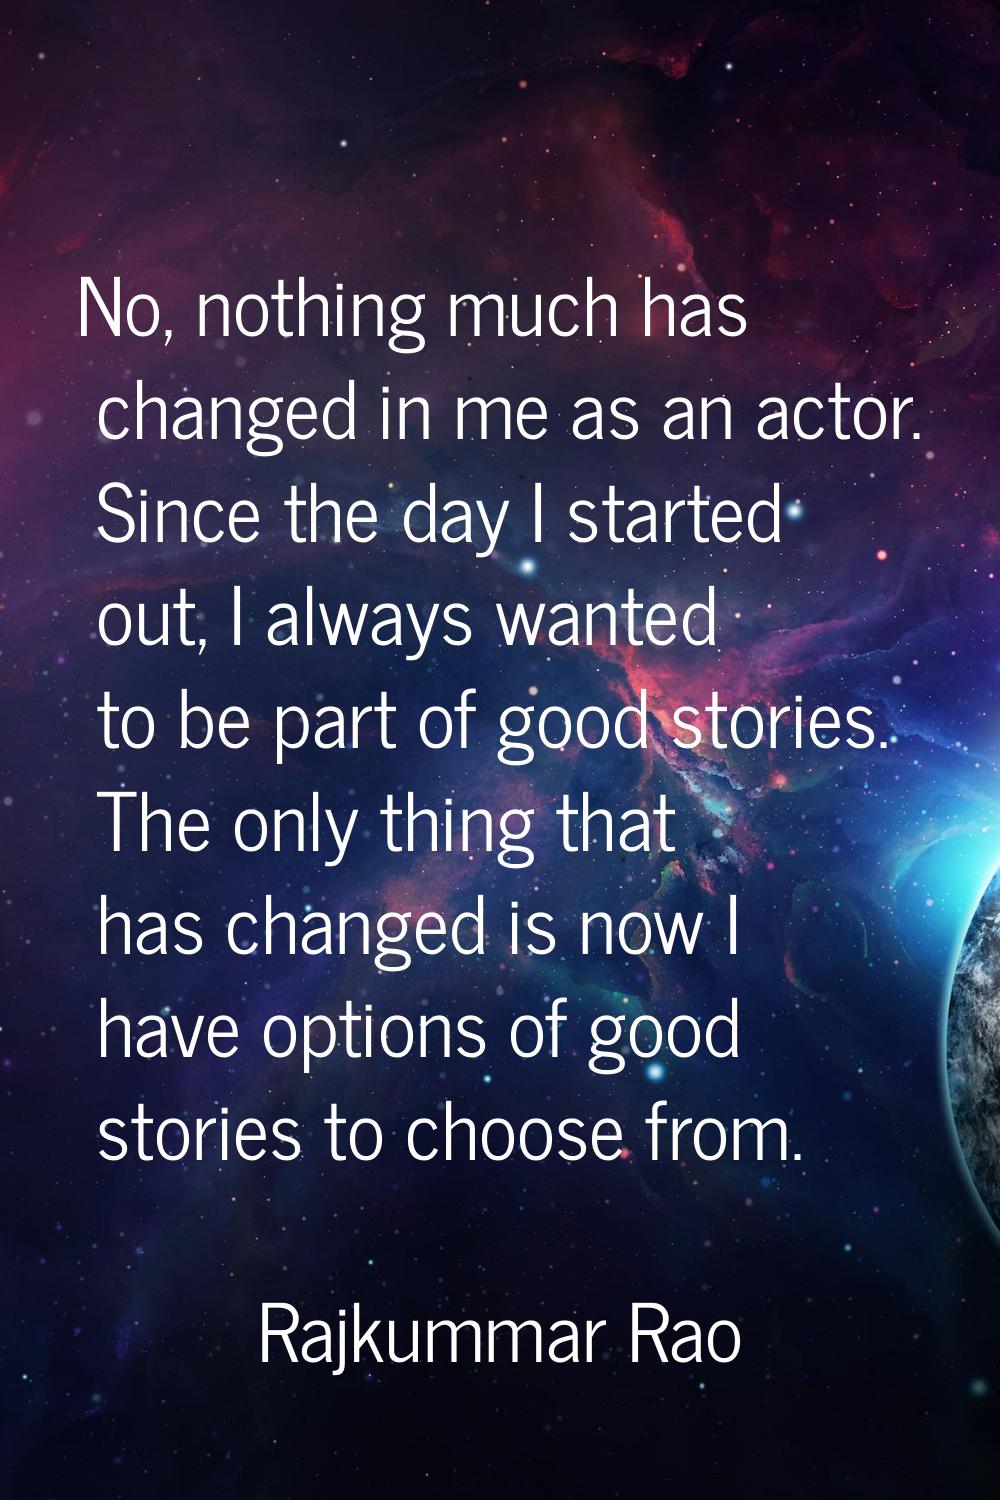 No, nothing much has changed in me as an actor. Since the day I started out, I always wanted to be 